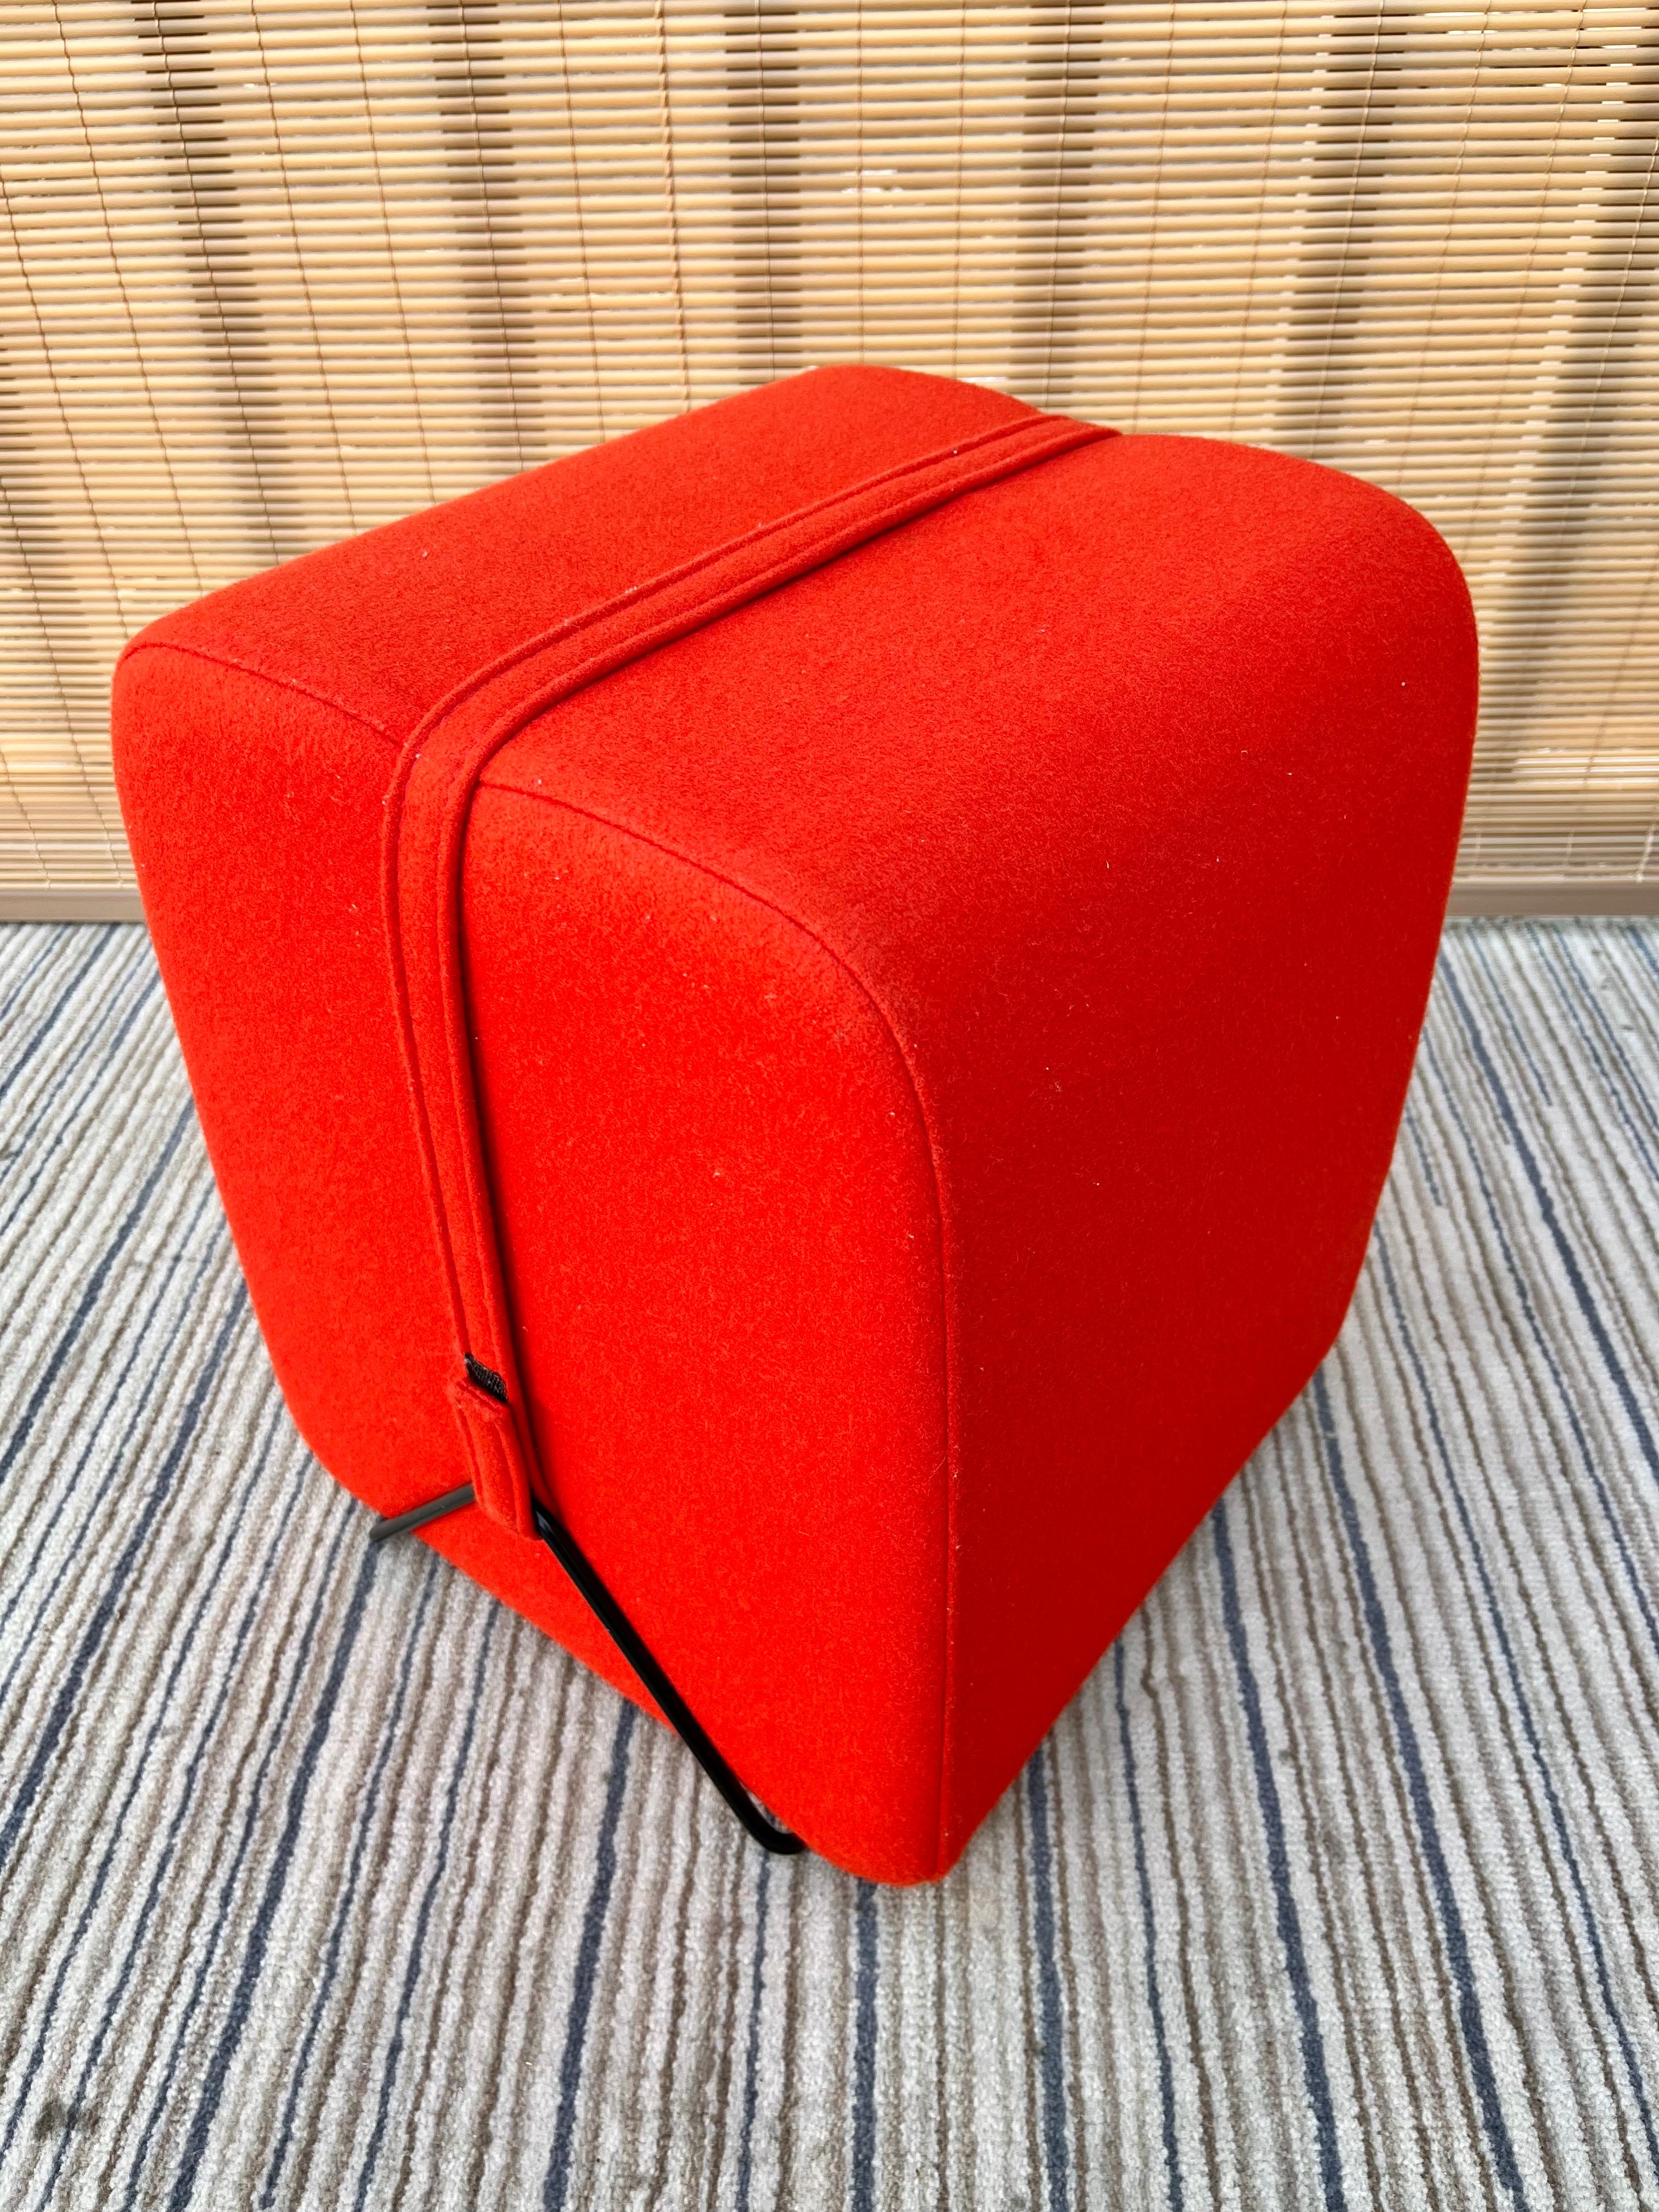 Contemporary Mobidec Footstool by Pierre Charpin for Ligne Roset 1